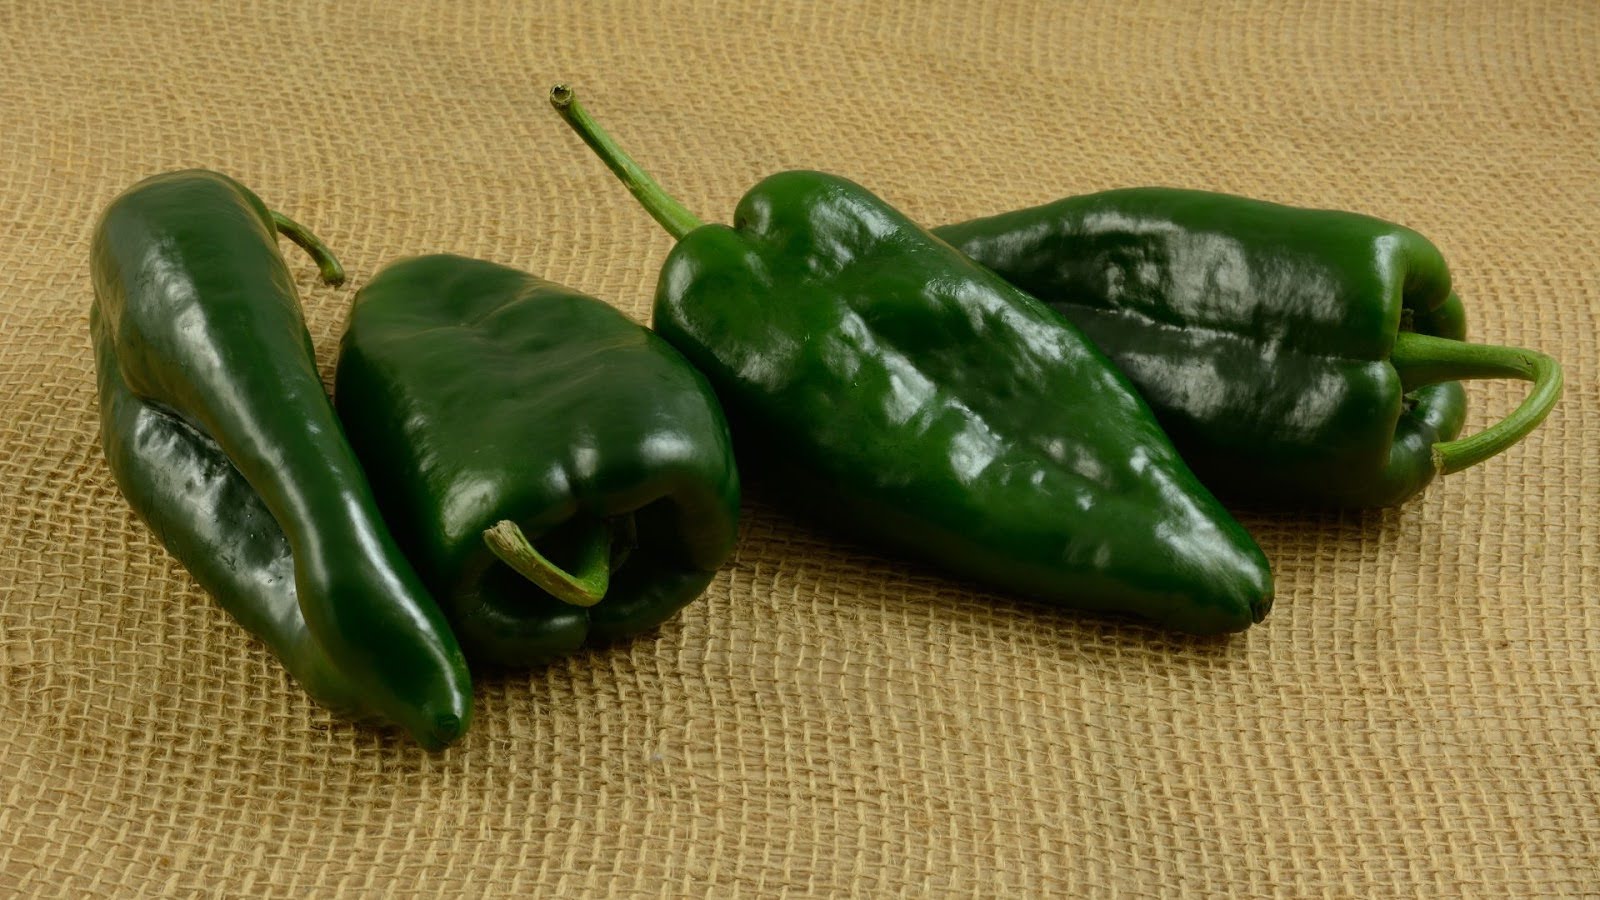 Green poblano peppers on a burlap background